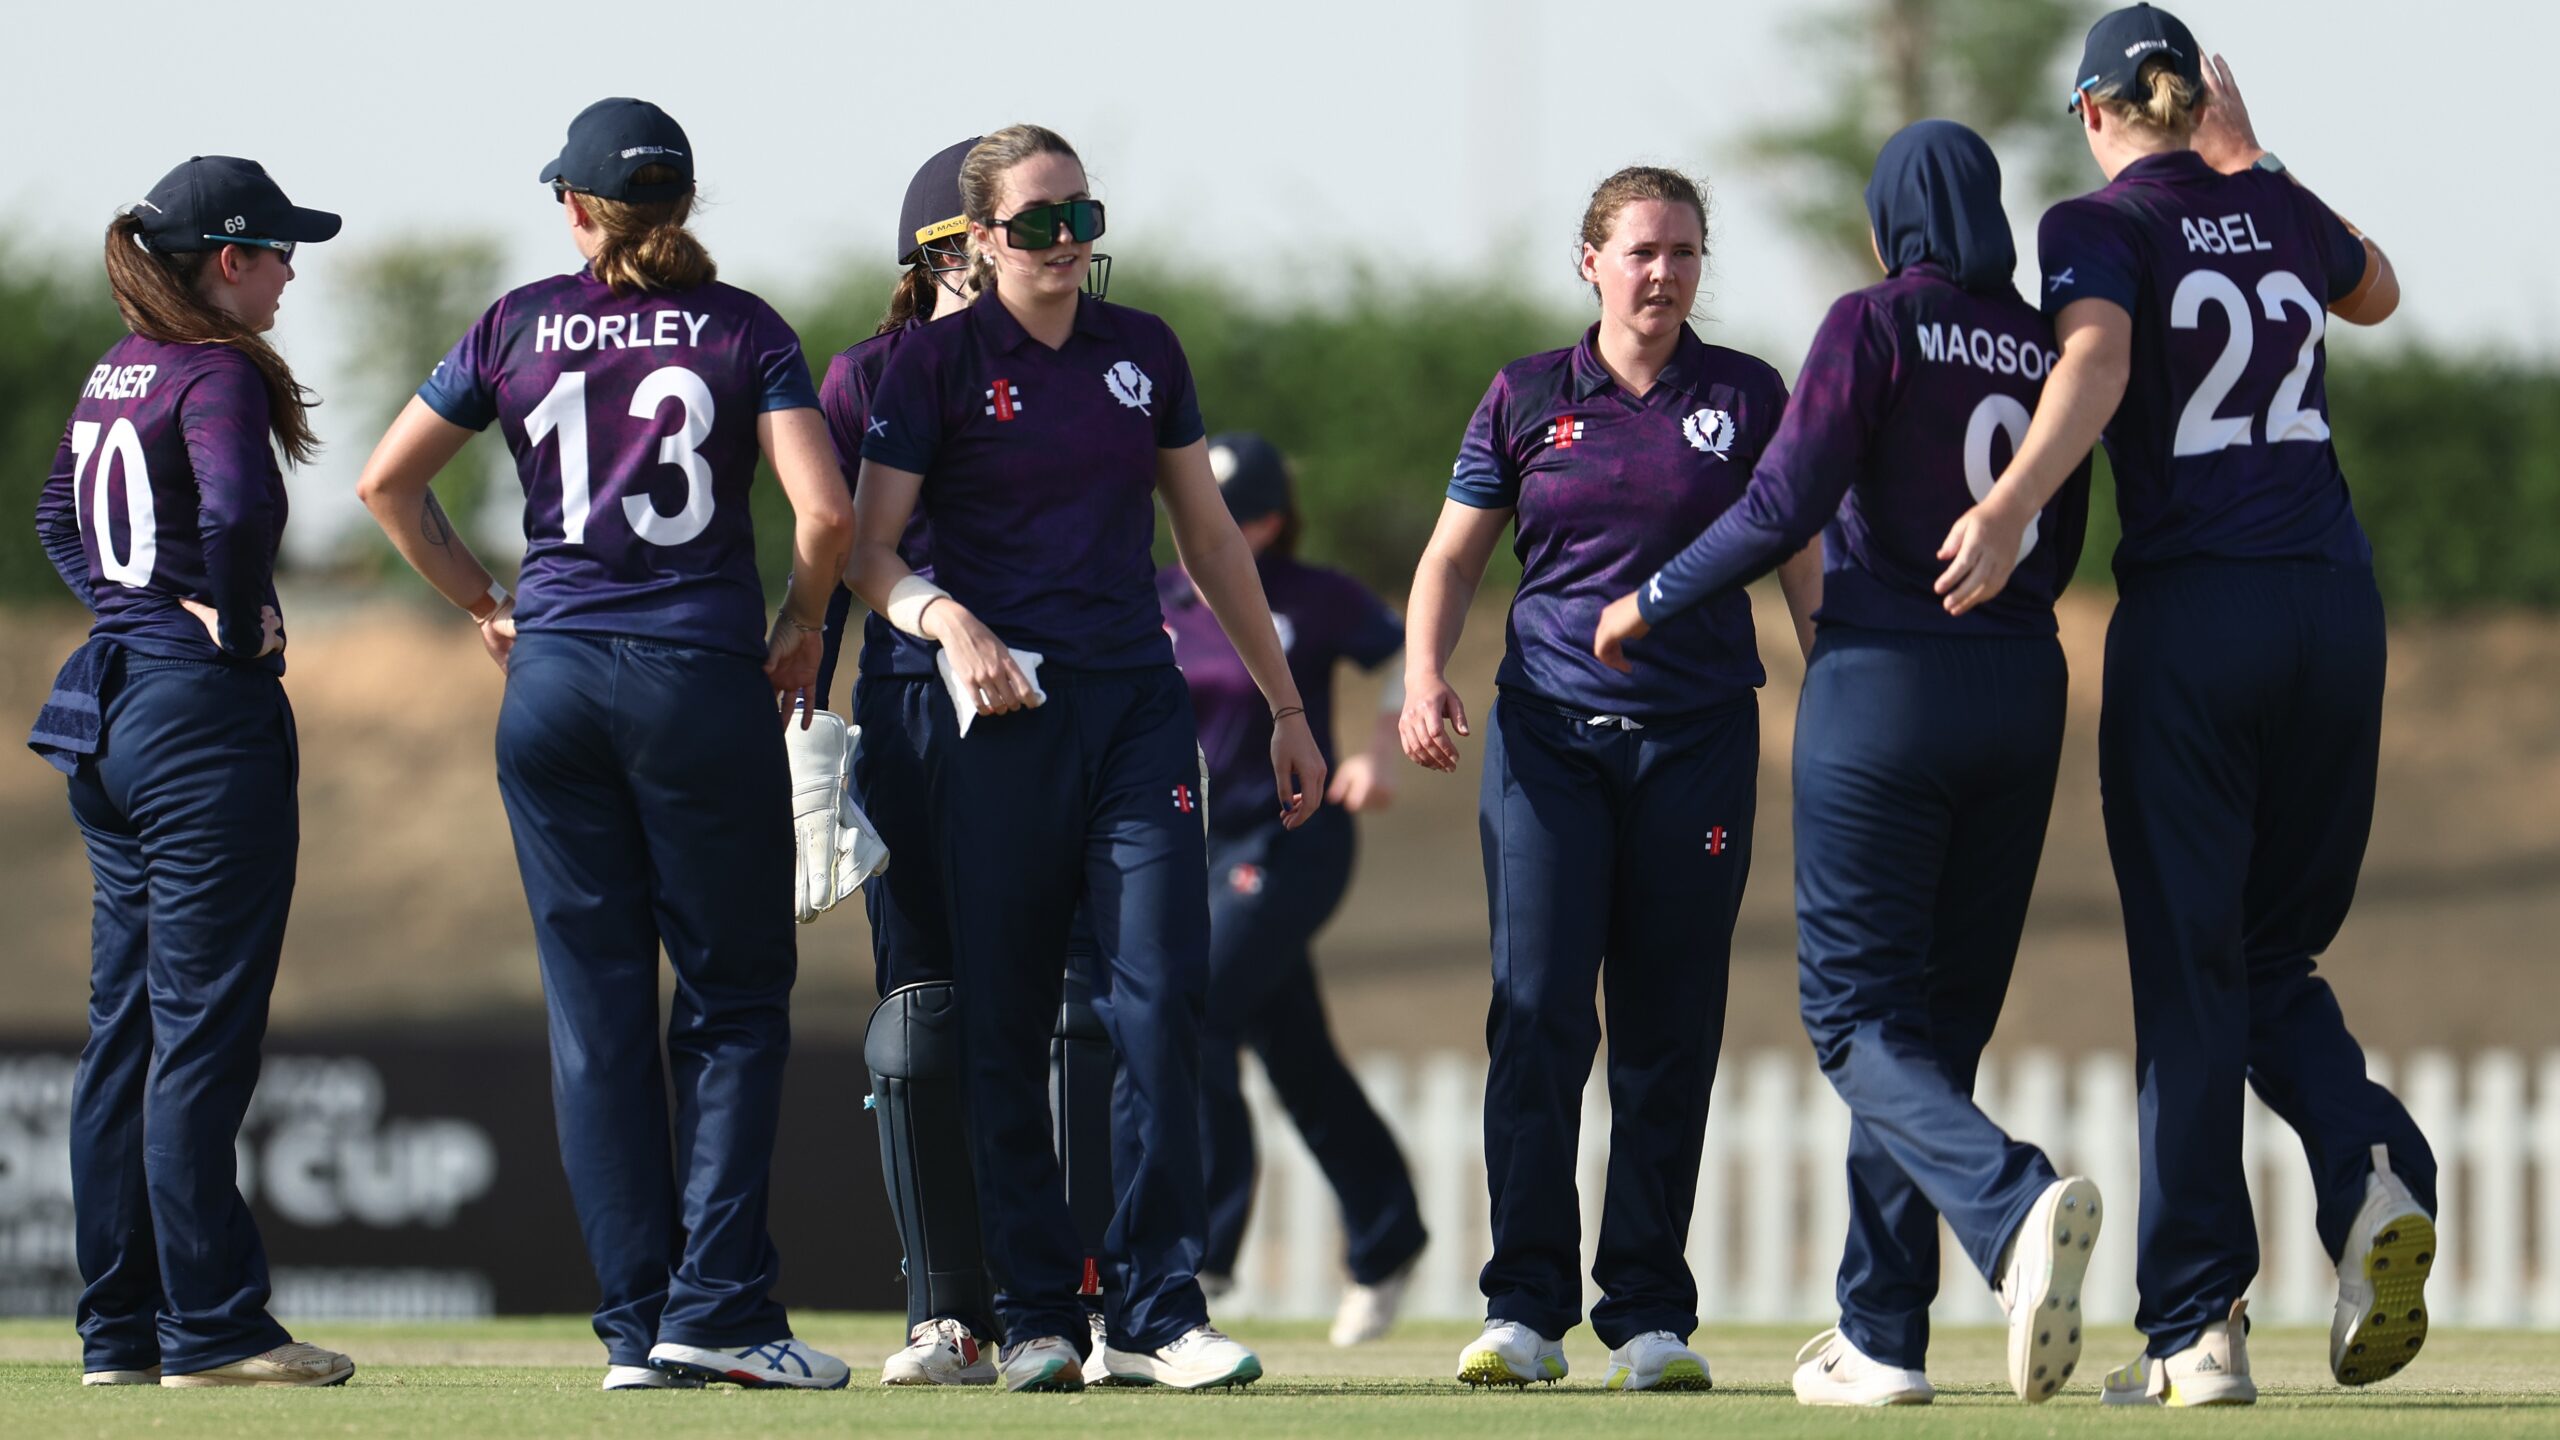 KATHRYN BRYCE LEADS SCOTLAND TO VICTORY OVER USA